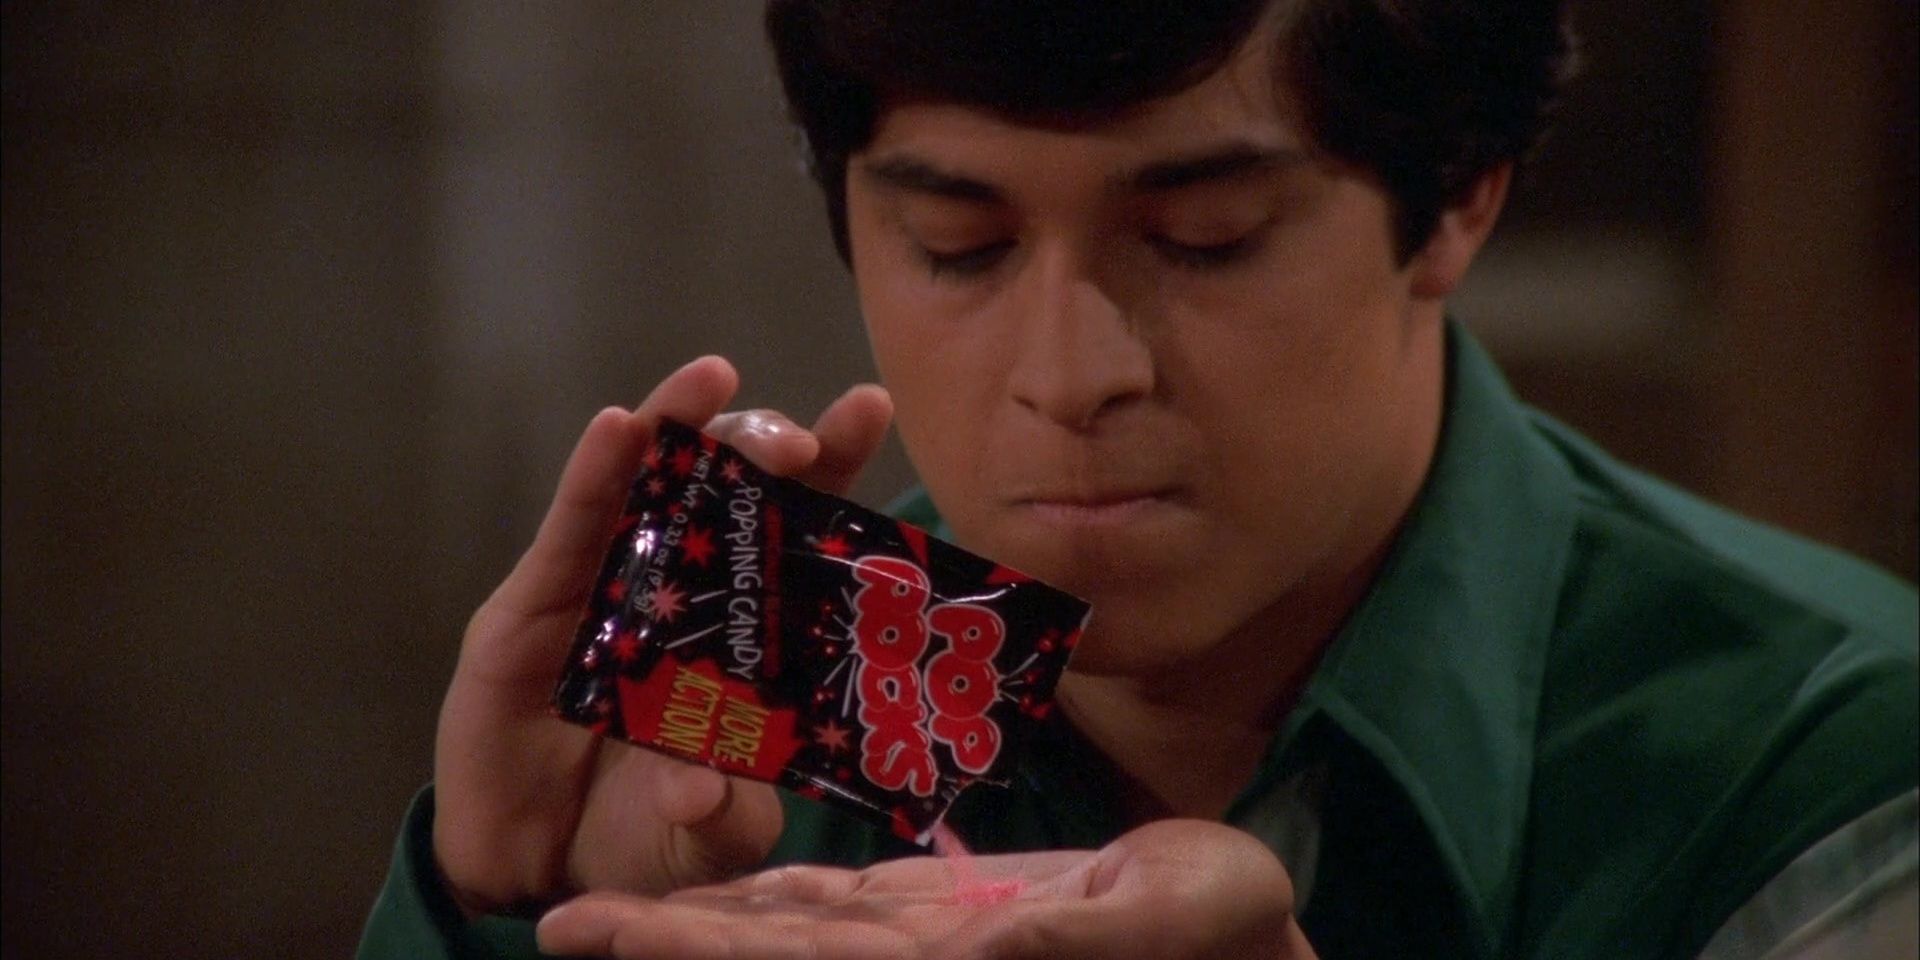 Fez eating Pop Rocks in That '70s Show 